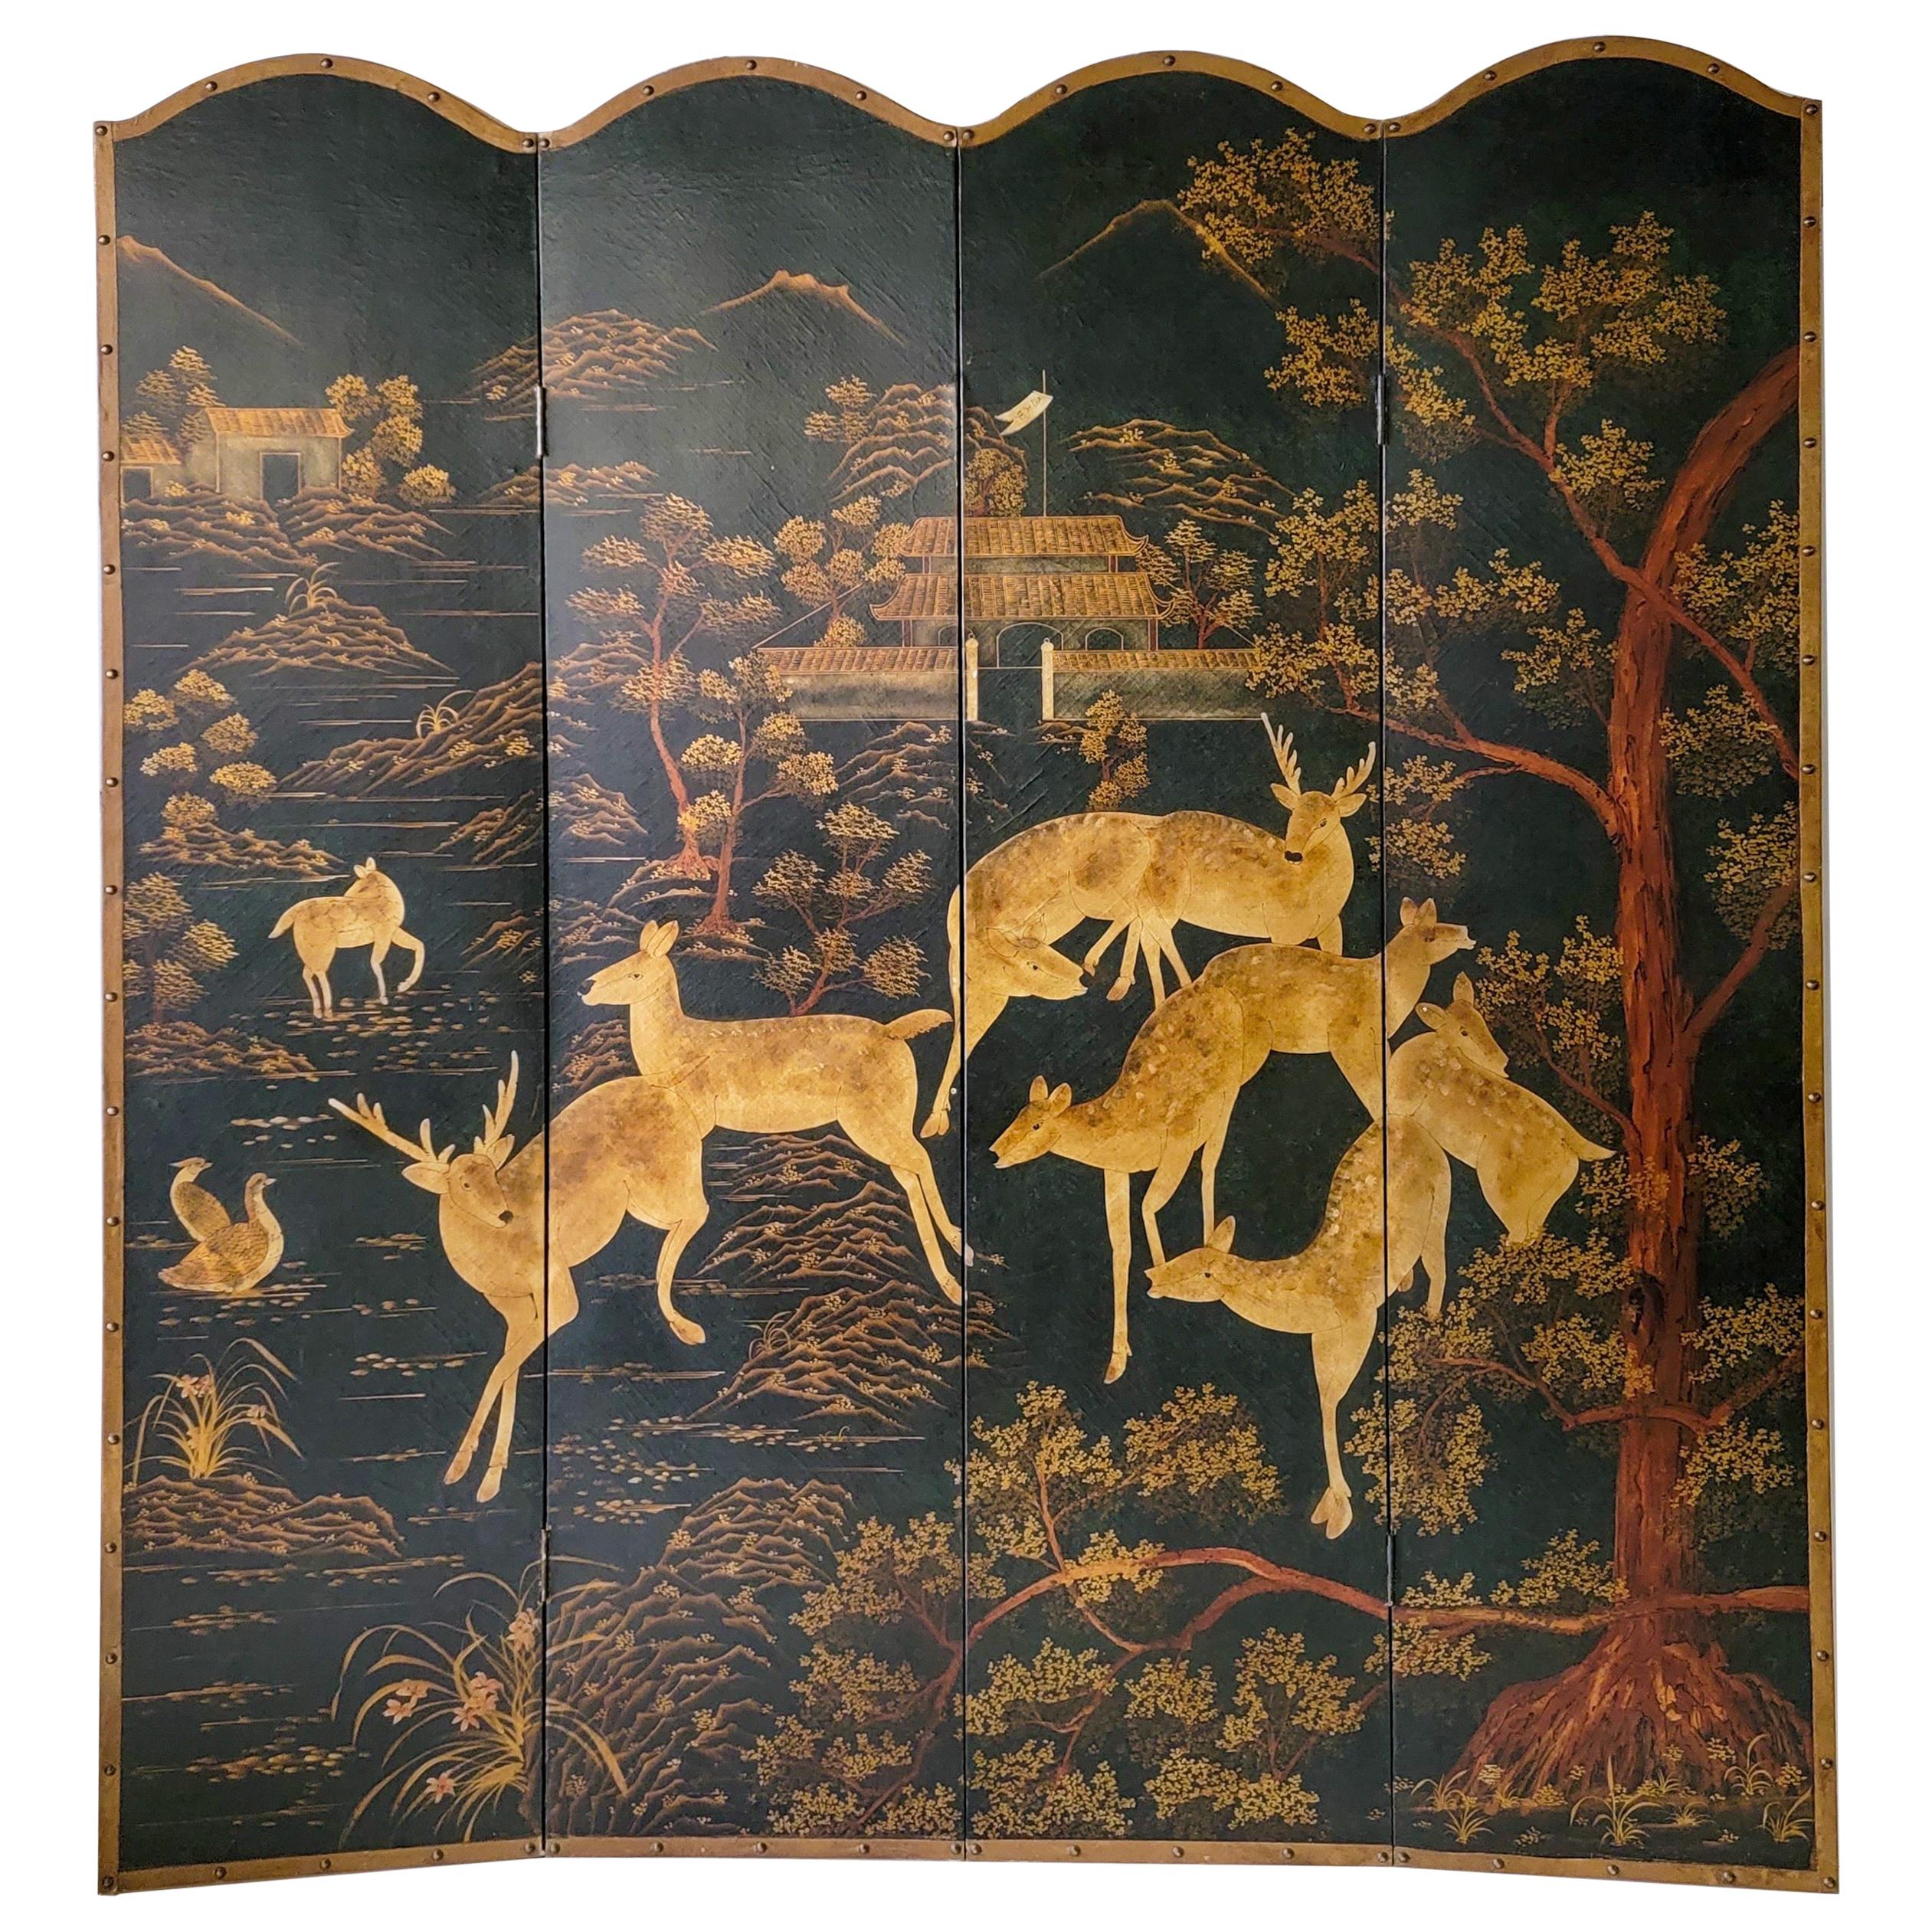 20th Century Pastoral Chinoiserie Folding Screen with Deer